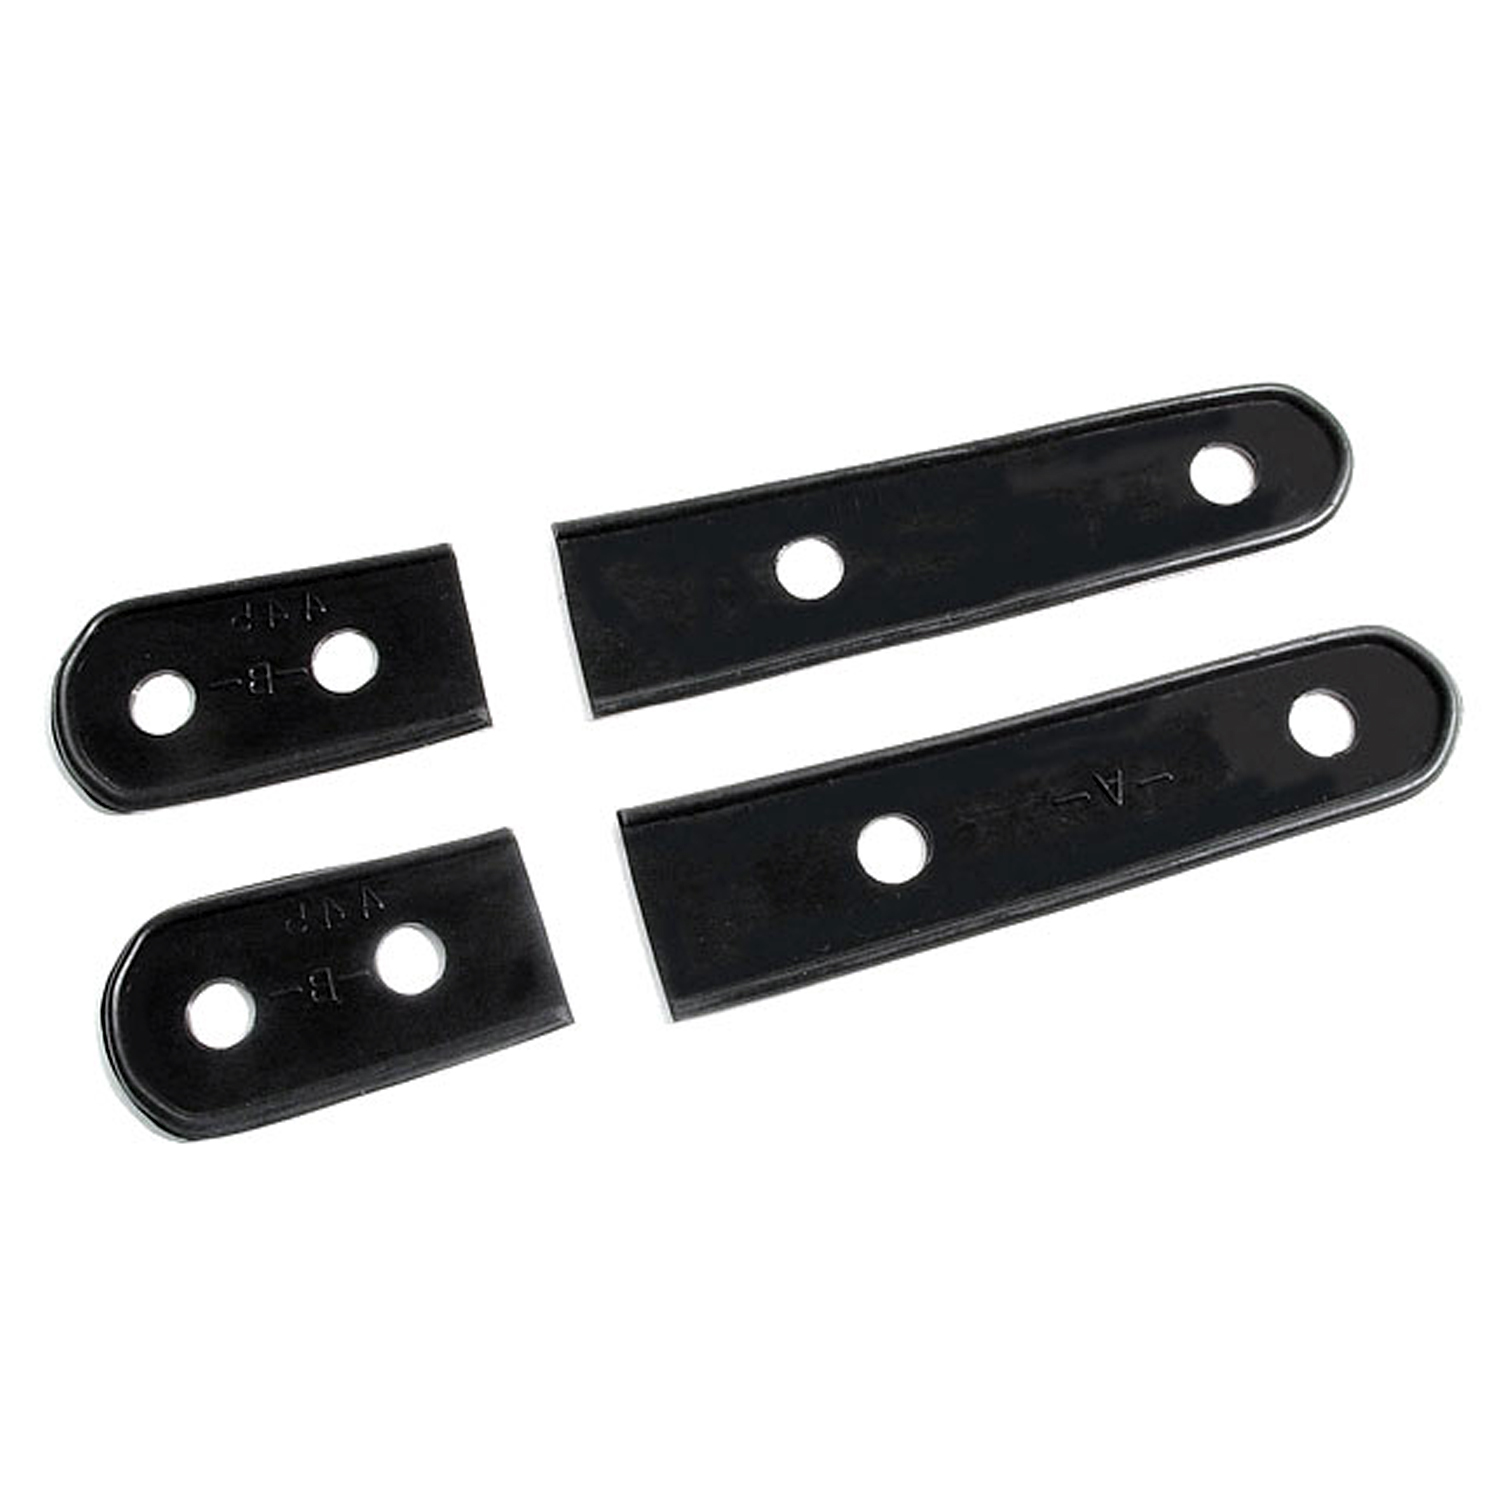 1940 Cadillac Series 60 Special Trunk Hinge Pads.  1-3/8 wide X 8 long.  4-Piece Set-MP 445